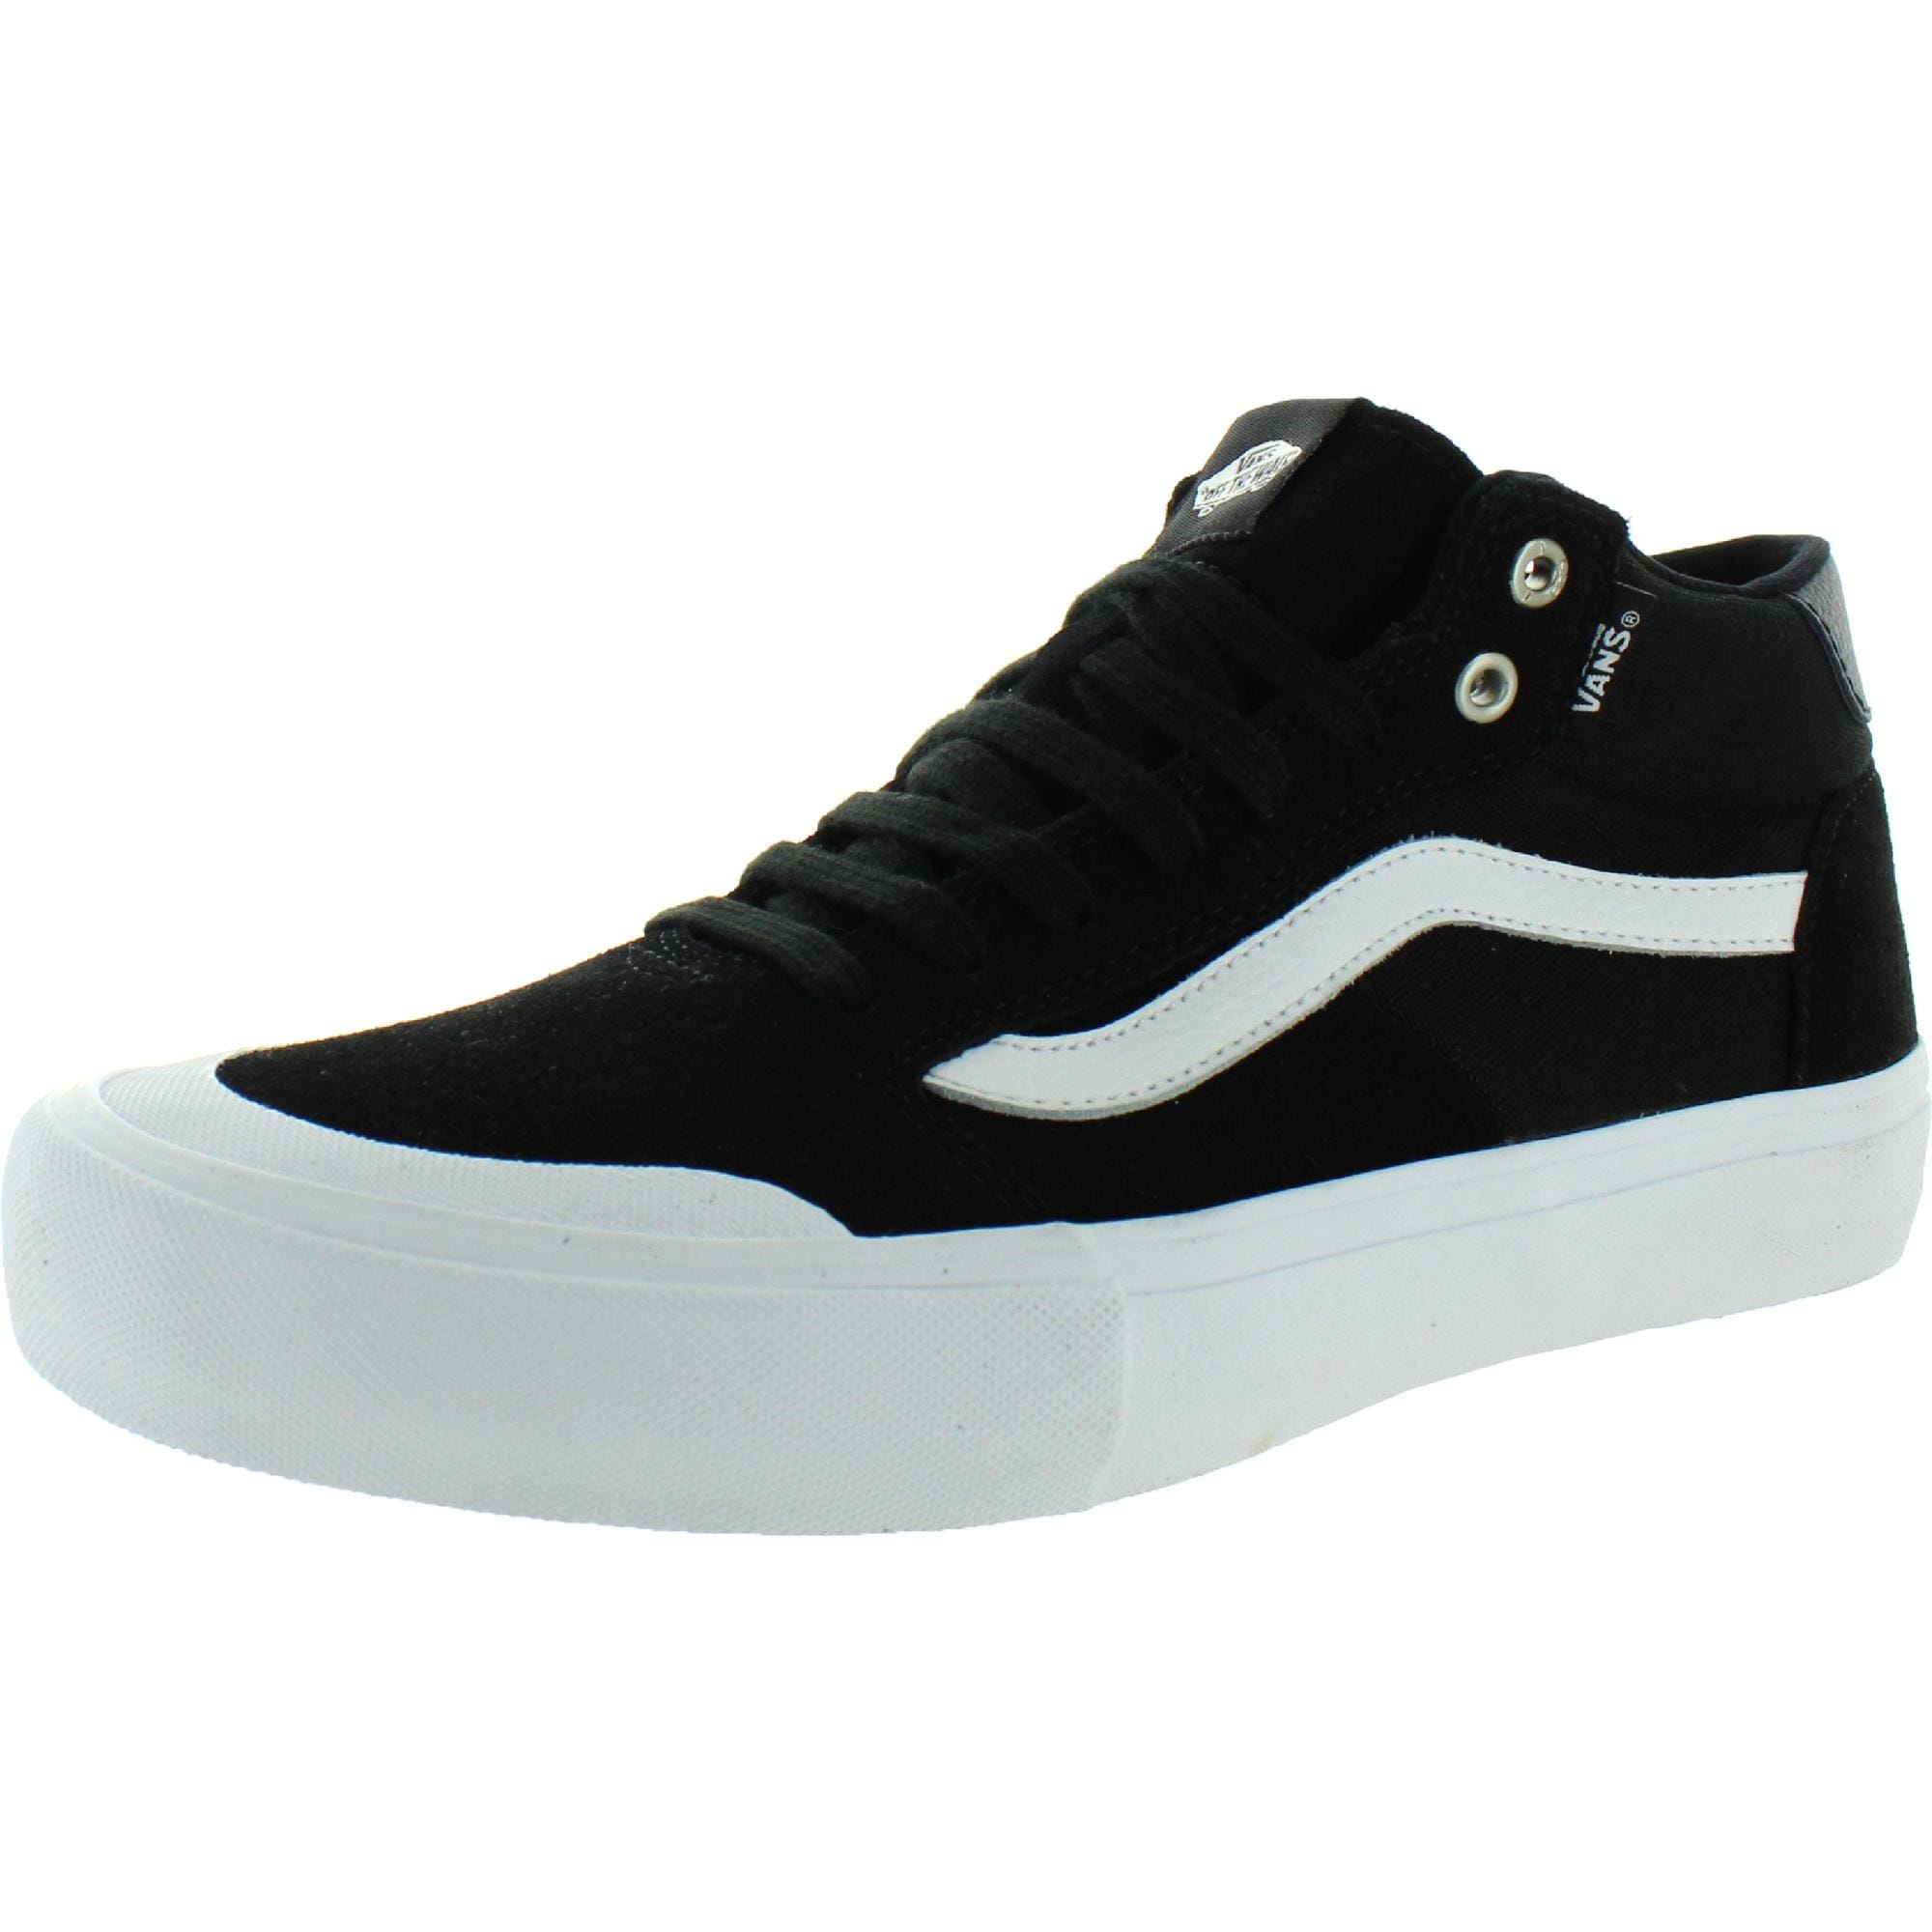 Mid Top Skate Shoes Online Sale, UP TO 